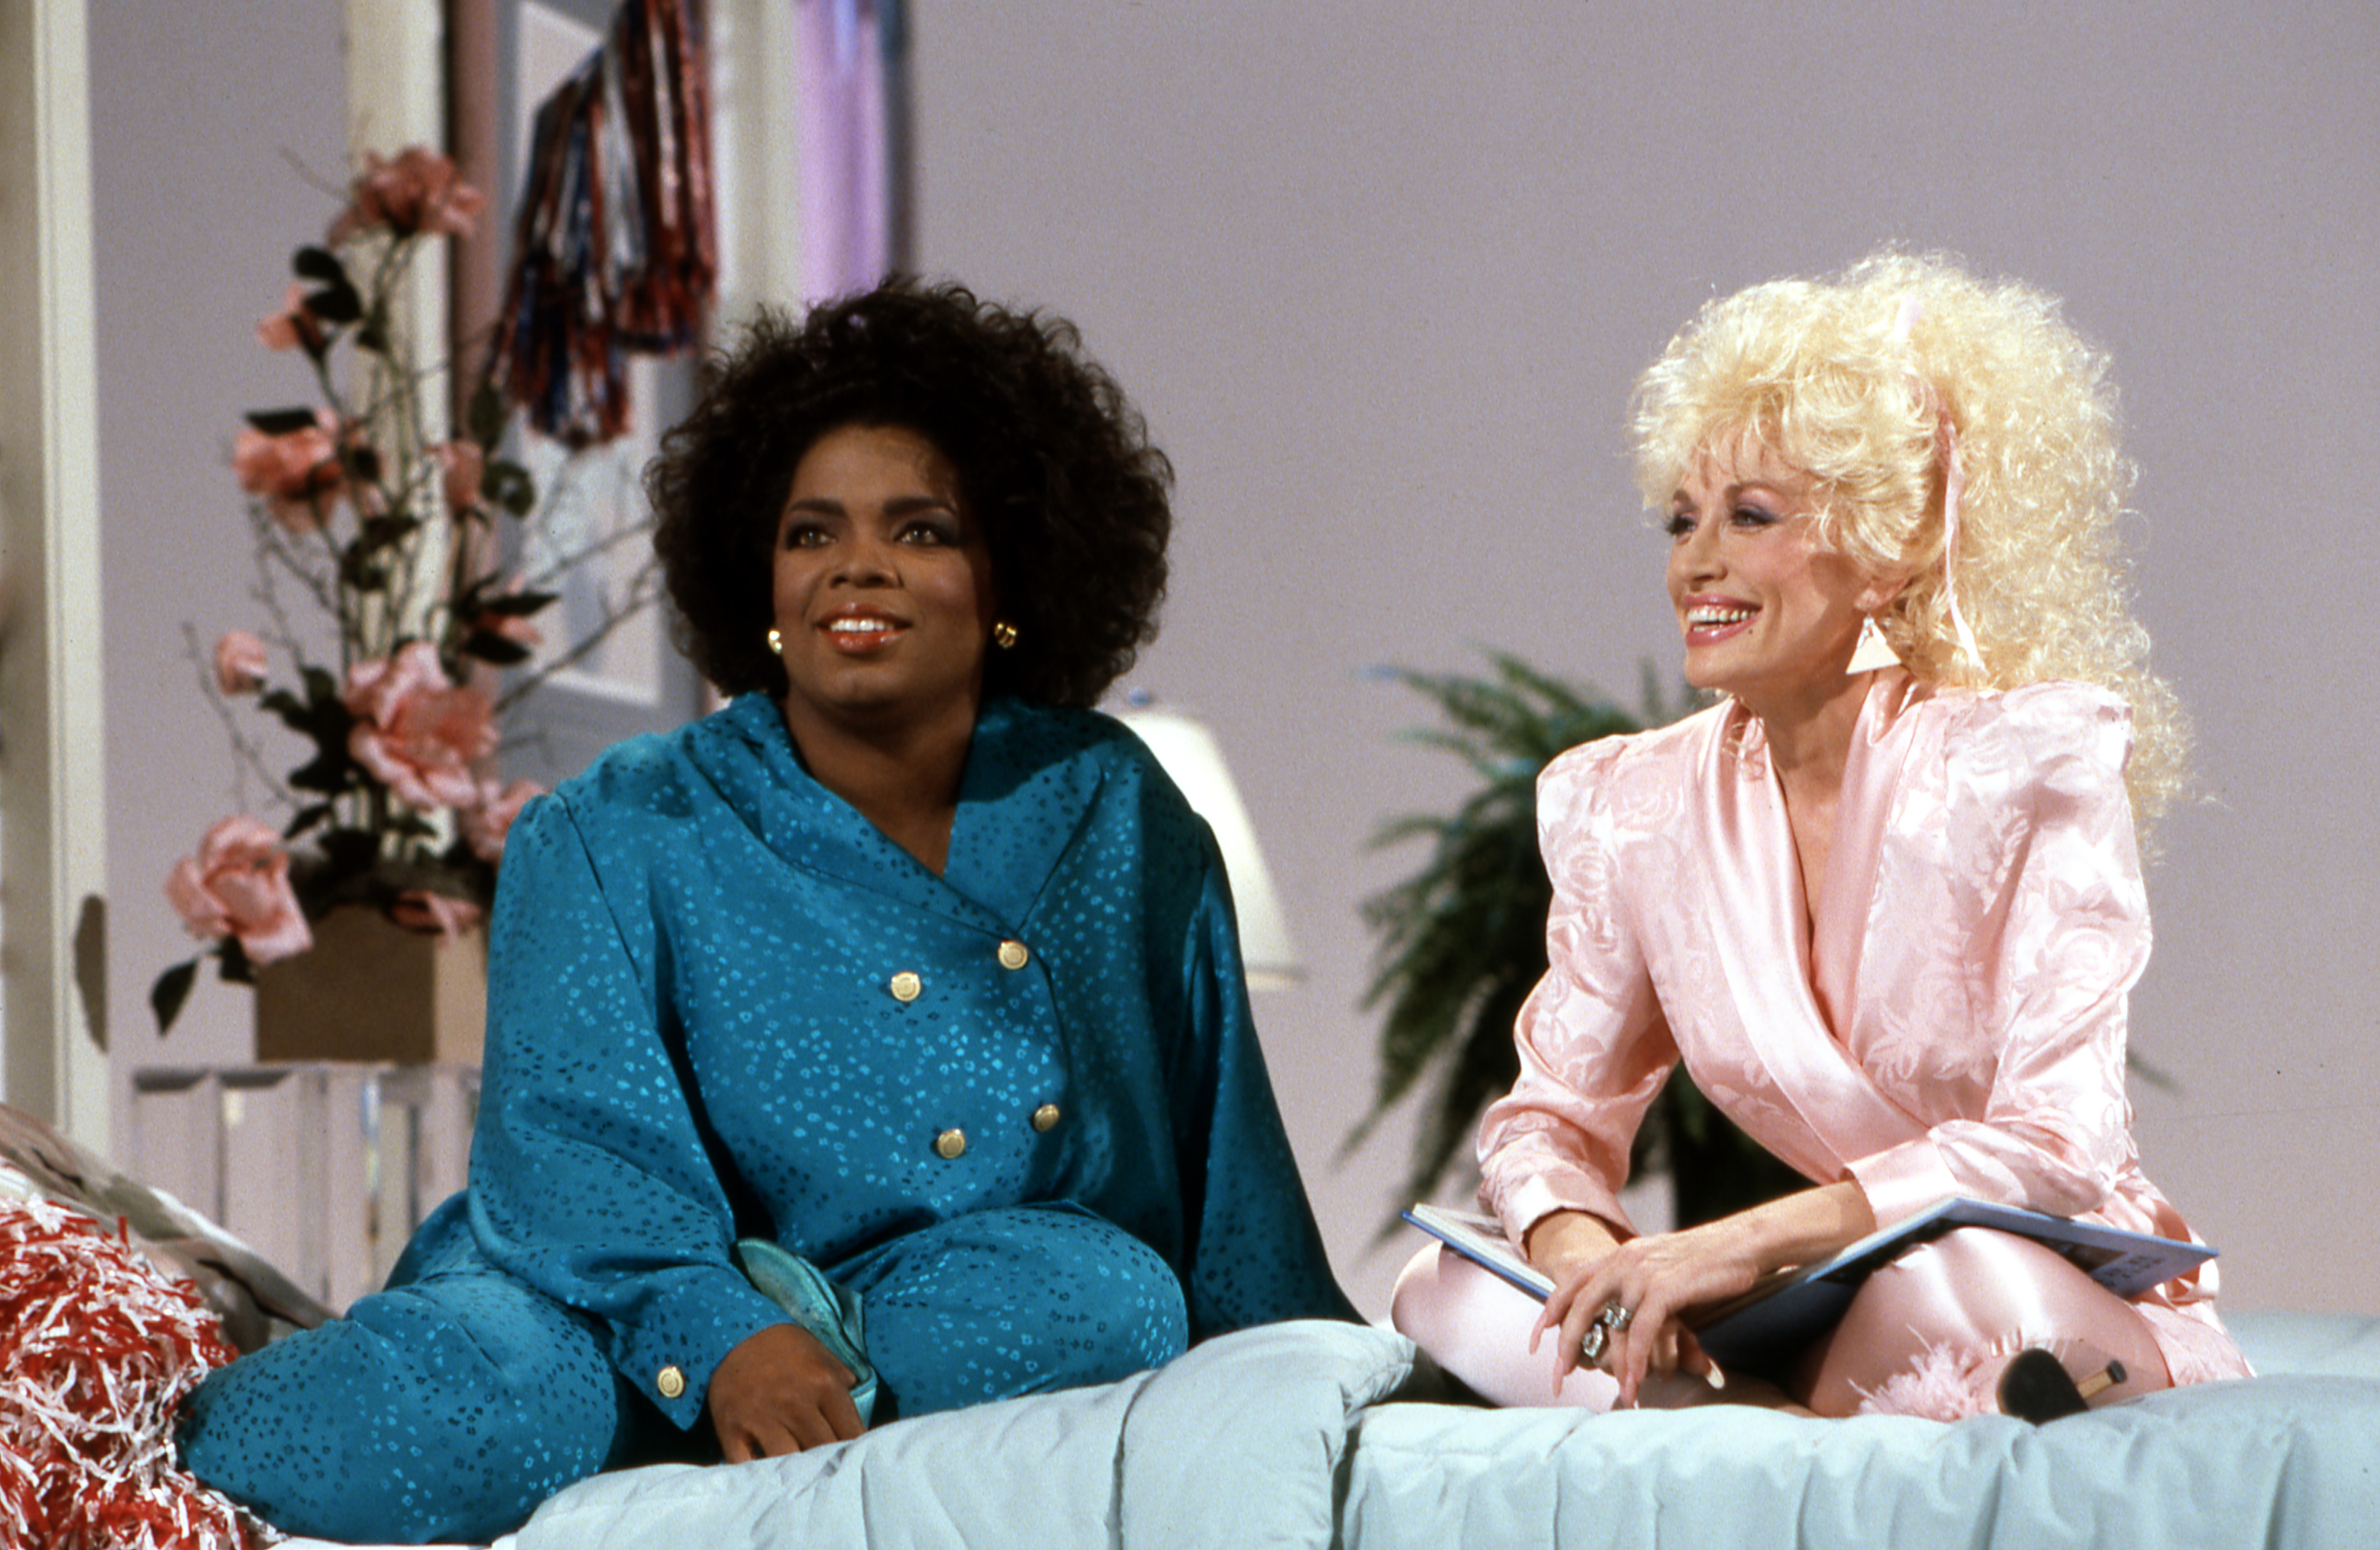 Oprah Winfrey and Dolly Parton in an episode of "Dolly" in 1987 | Source: Getty Images